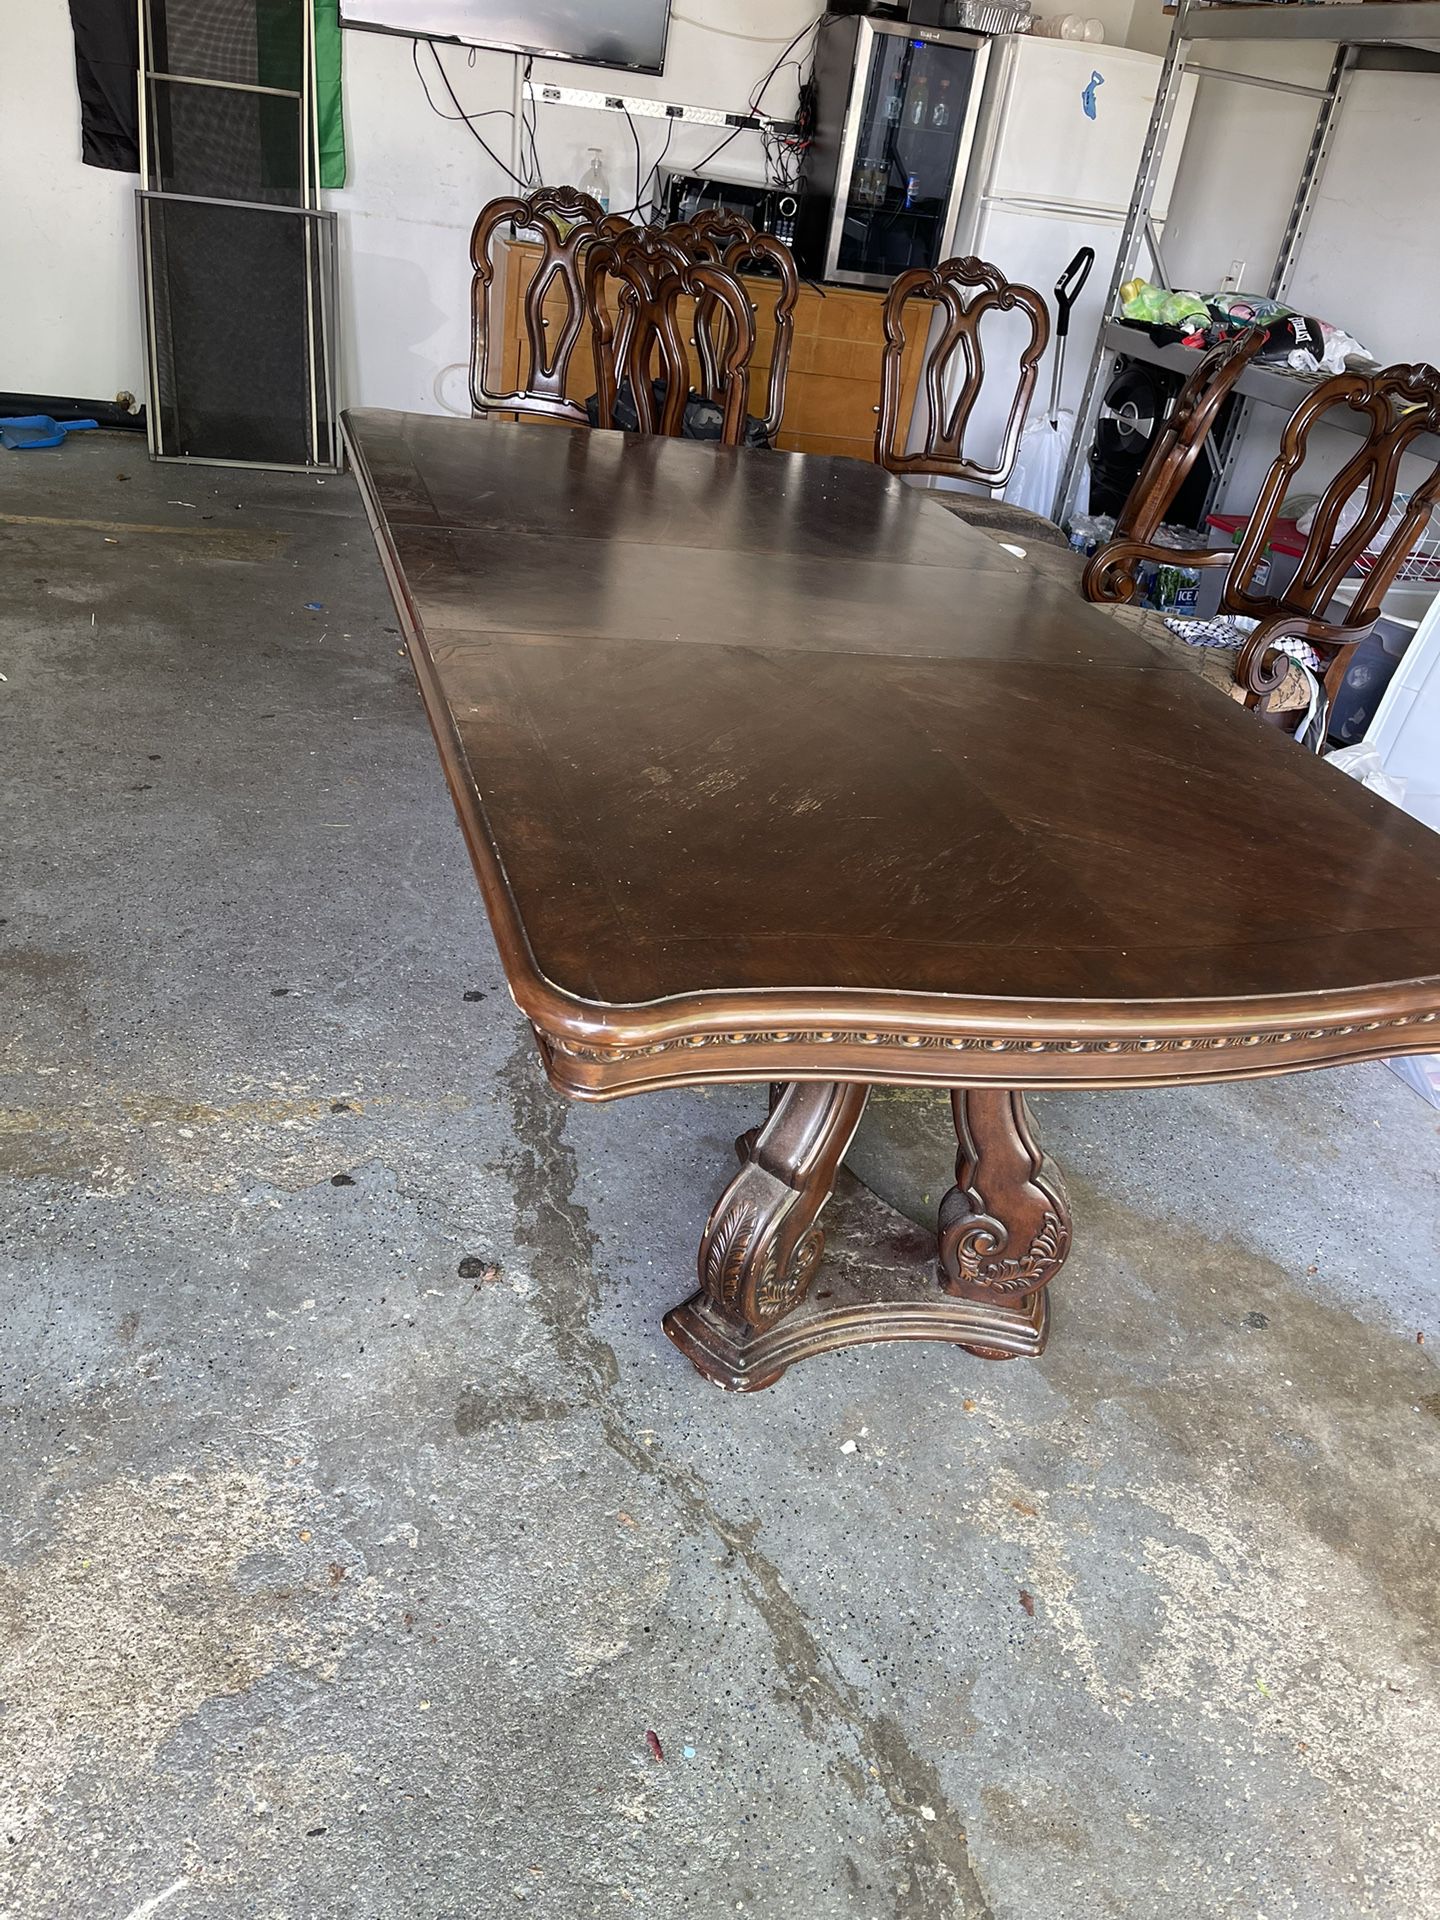 Wooden Table With 6 Chairs 